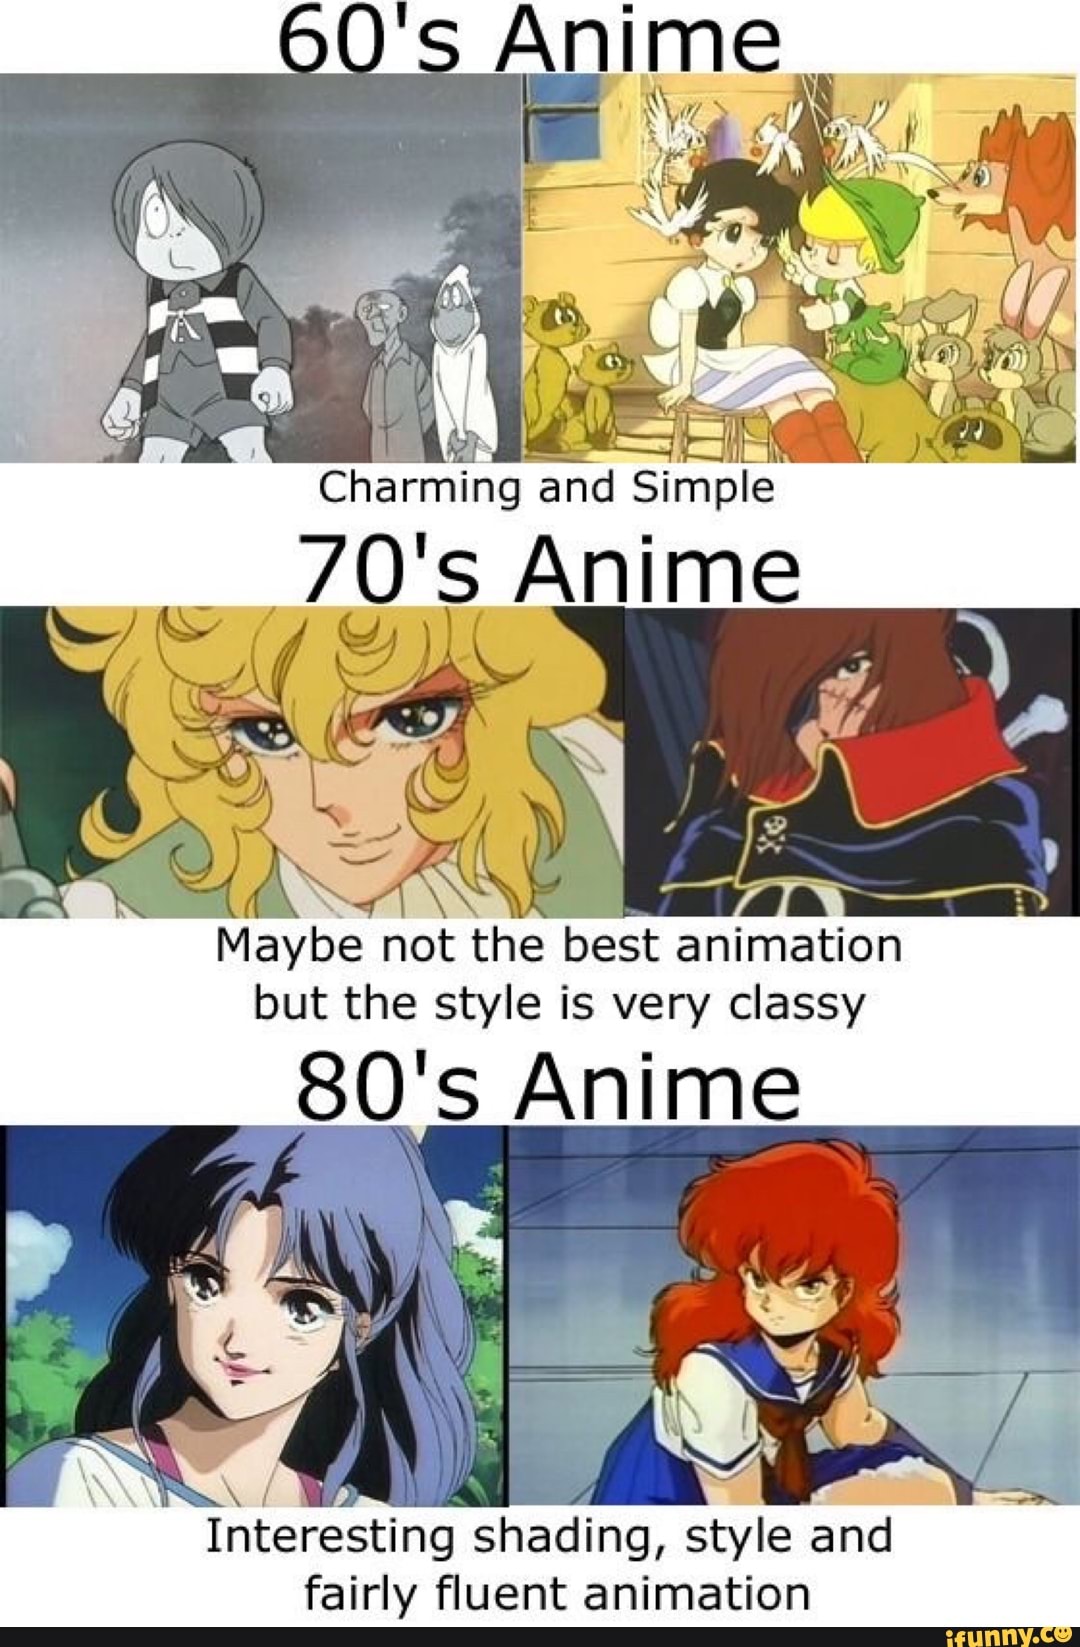 10 Popular Anime Of The 70s That Time Has Forgotten-demhanvico.com.vn